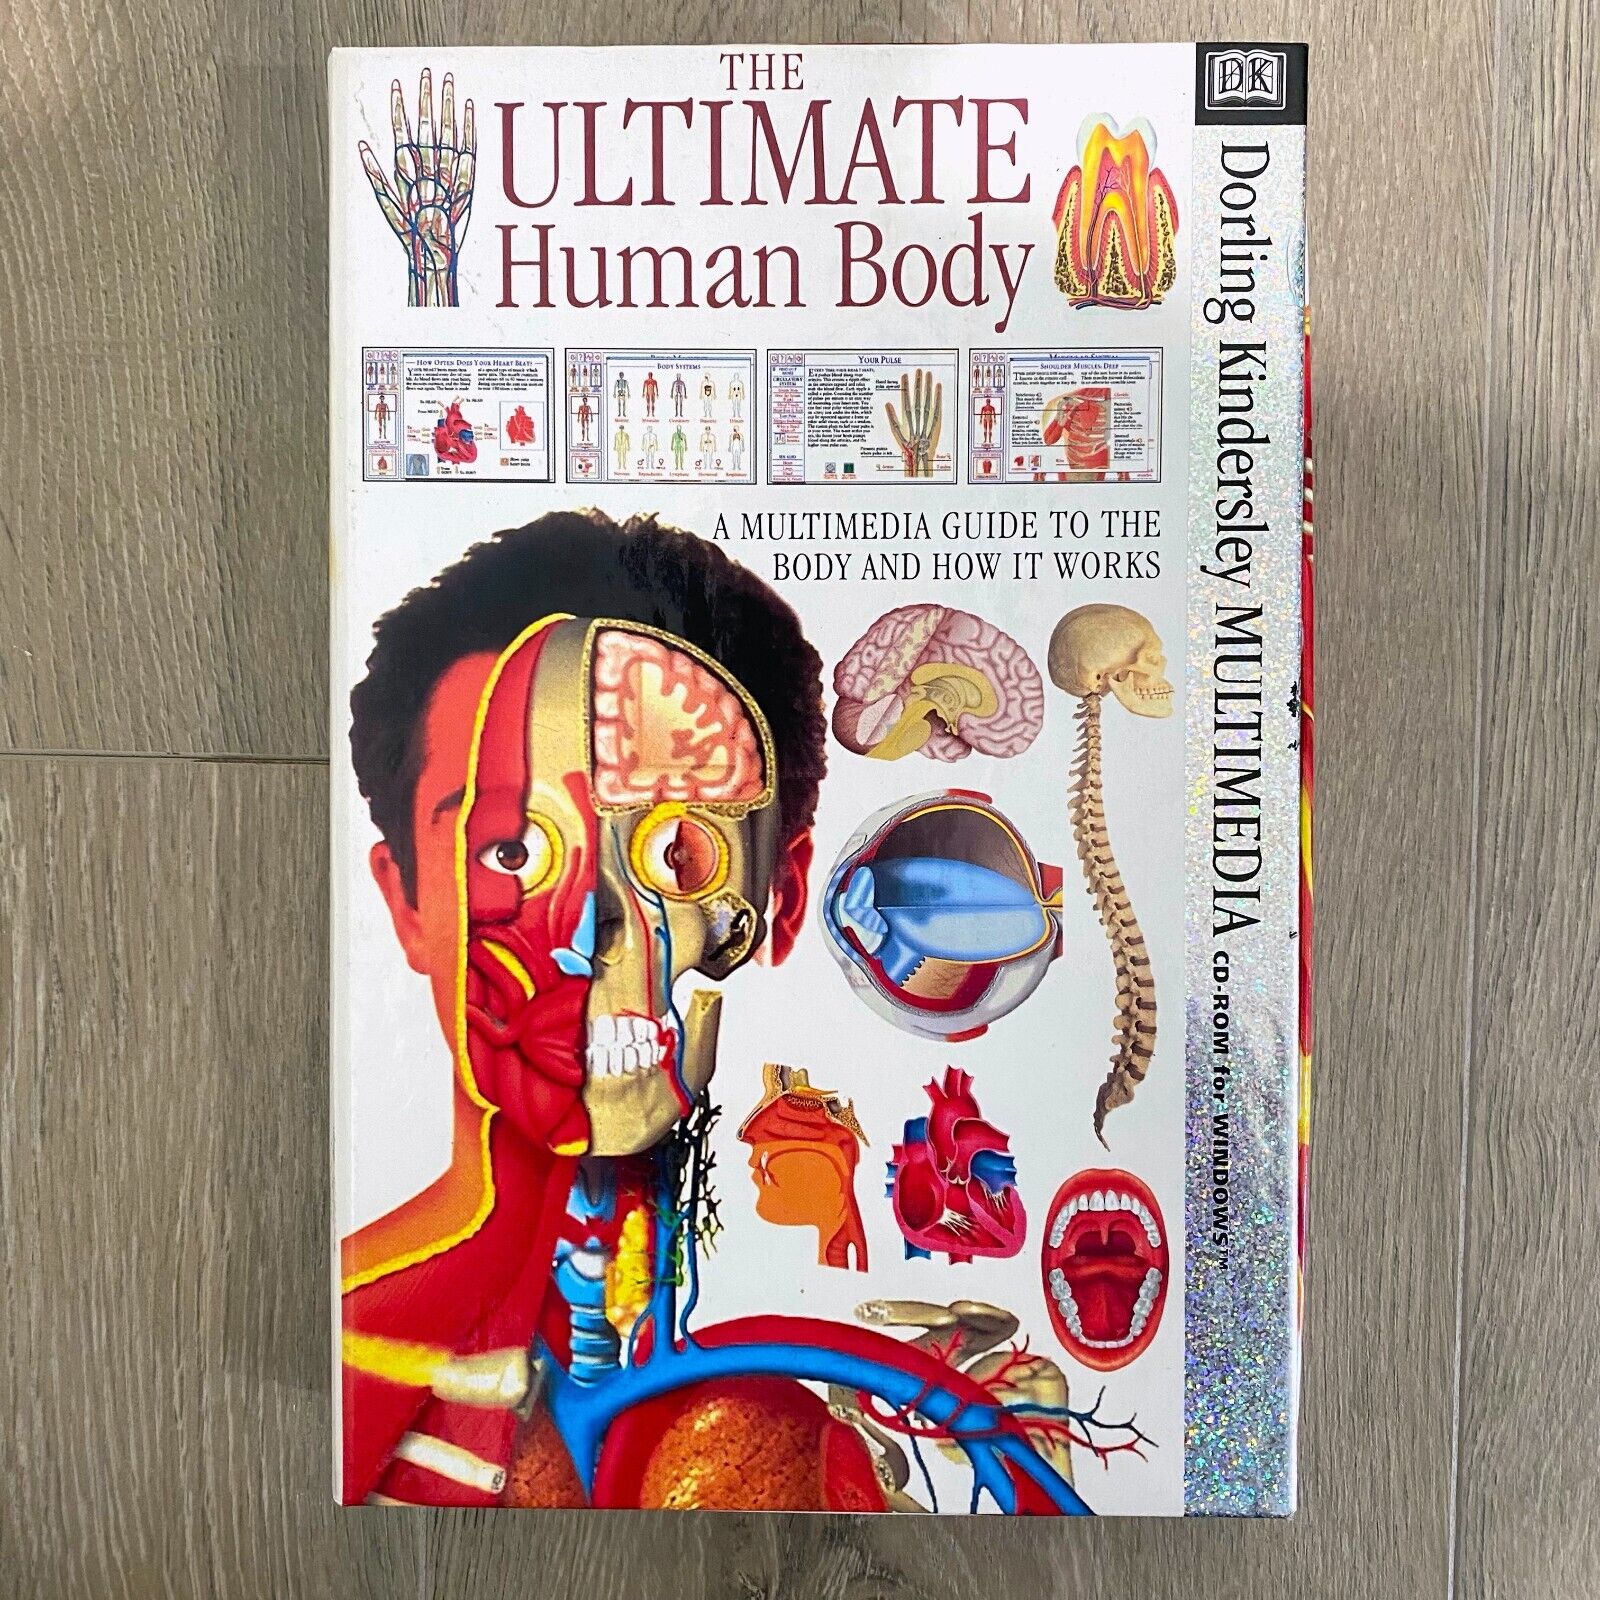 The Ultimate Human Body 2.0 by DK Multimedia for Windows CD-ROM